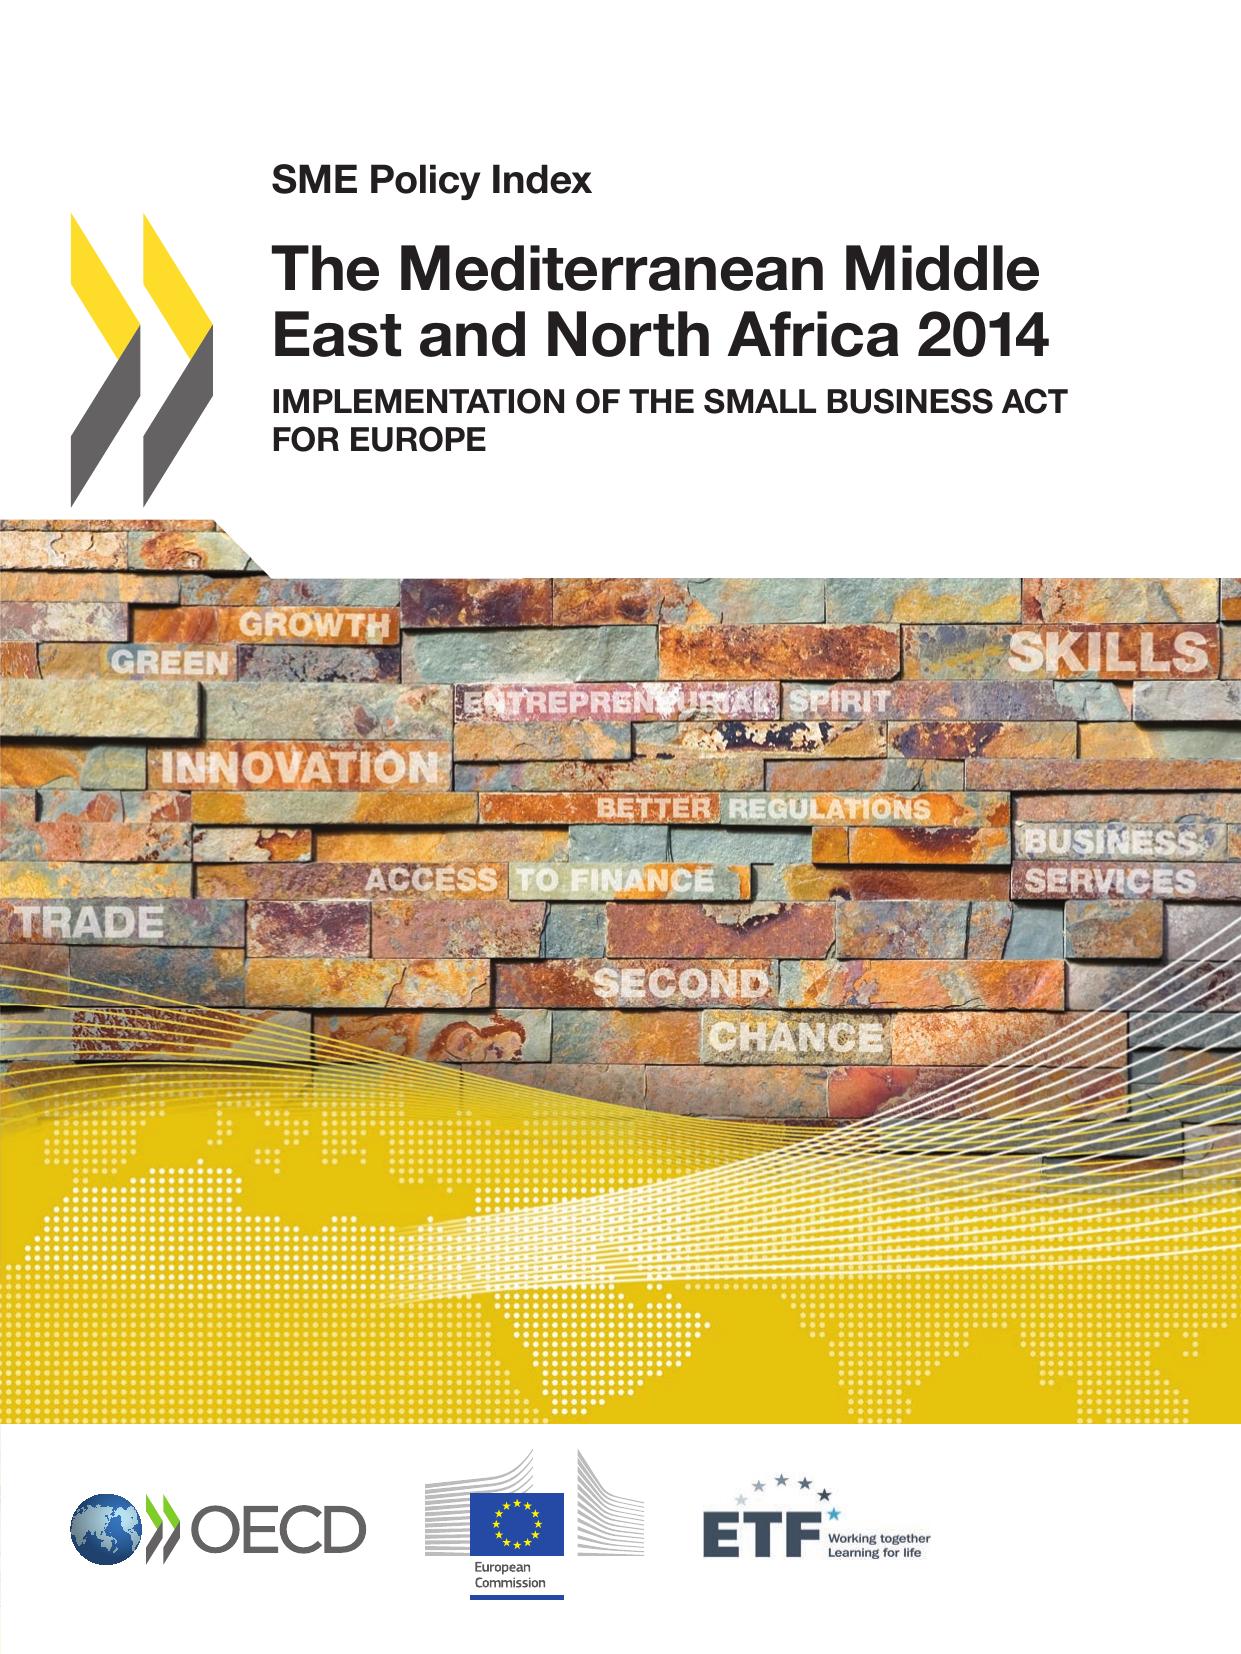 implementation of the Small Business Act for 2014 for Europe.-OECD Publishing 2014